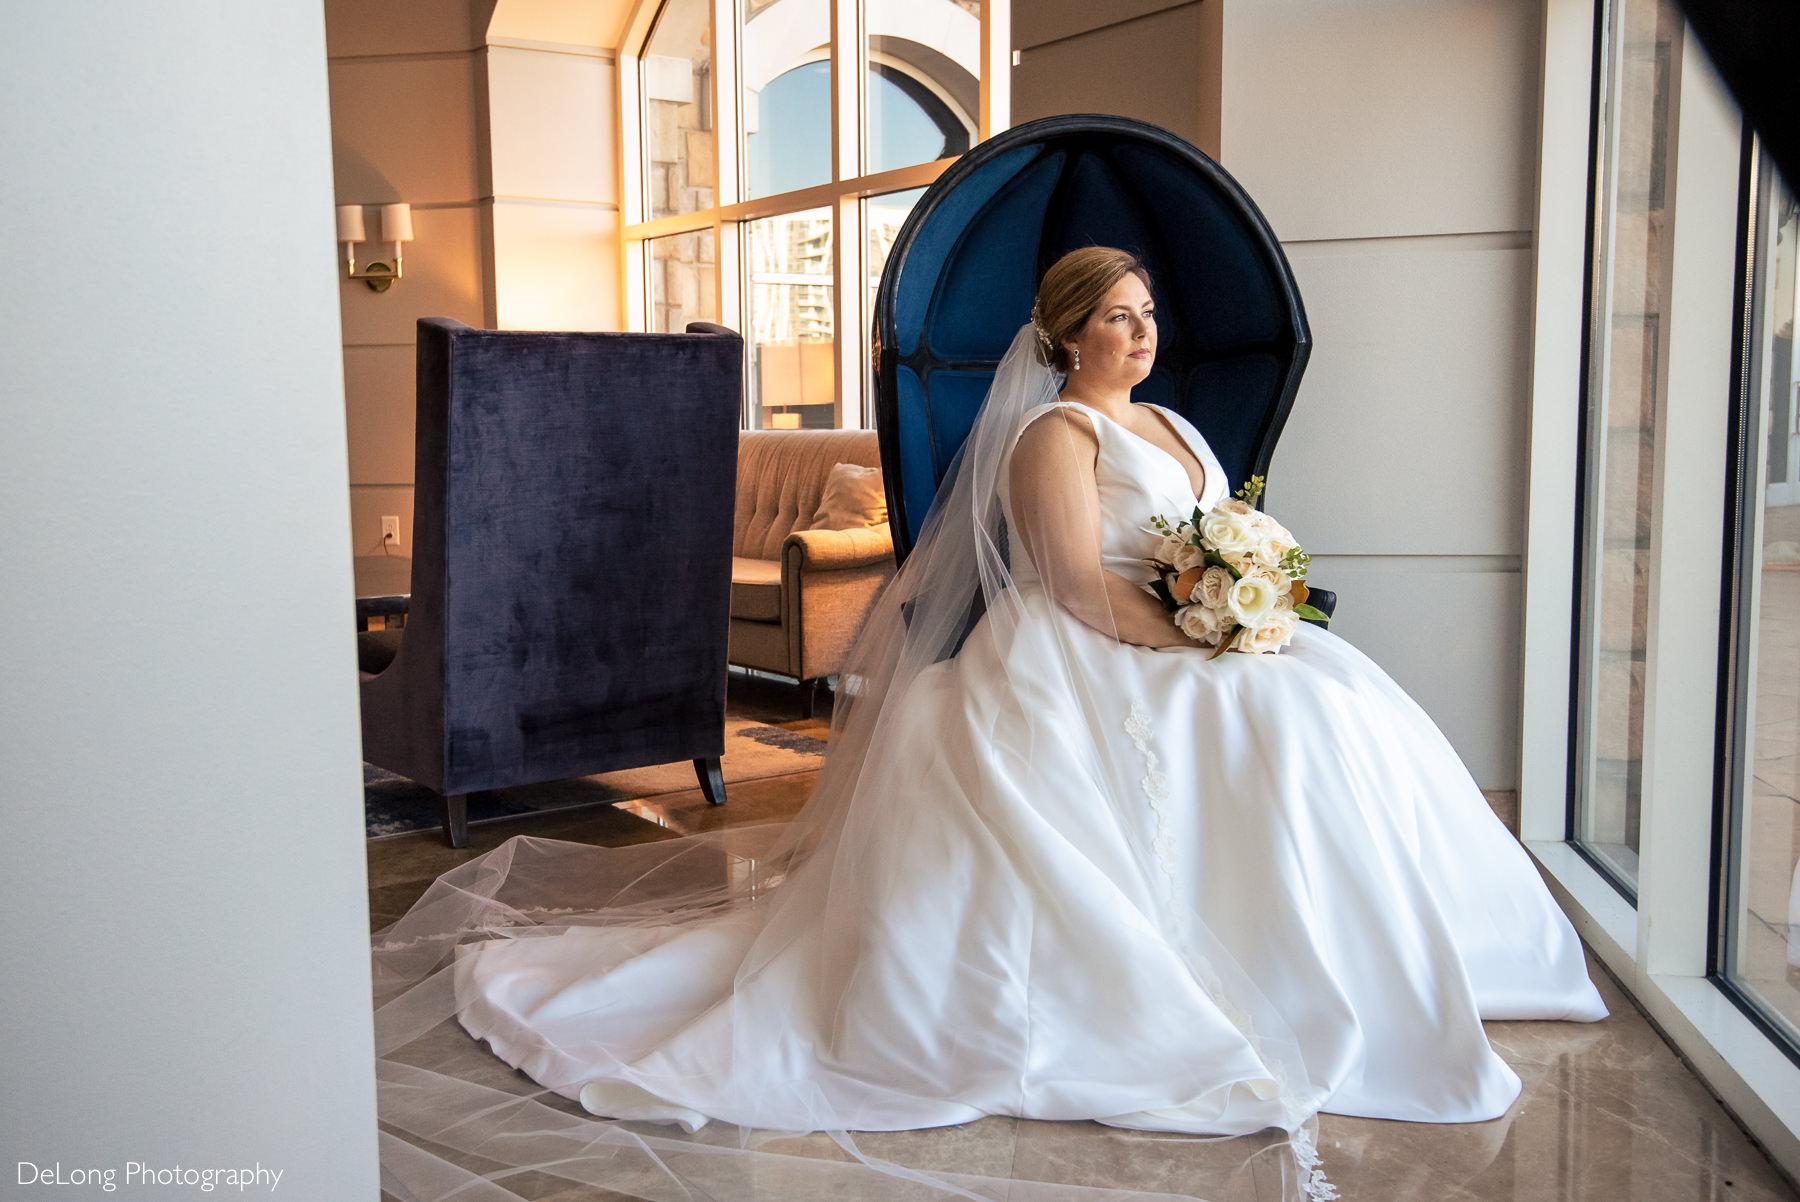 Seated bridal portrait in large blue egg chair at the Ballantyne Hotel by Charlotte Wedding Photographers DeLong Photography